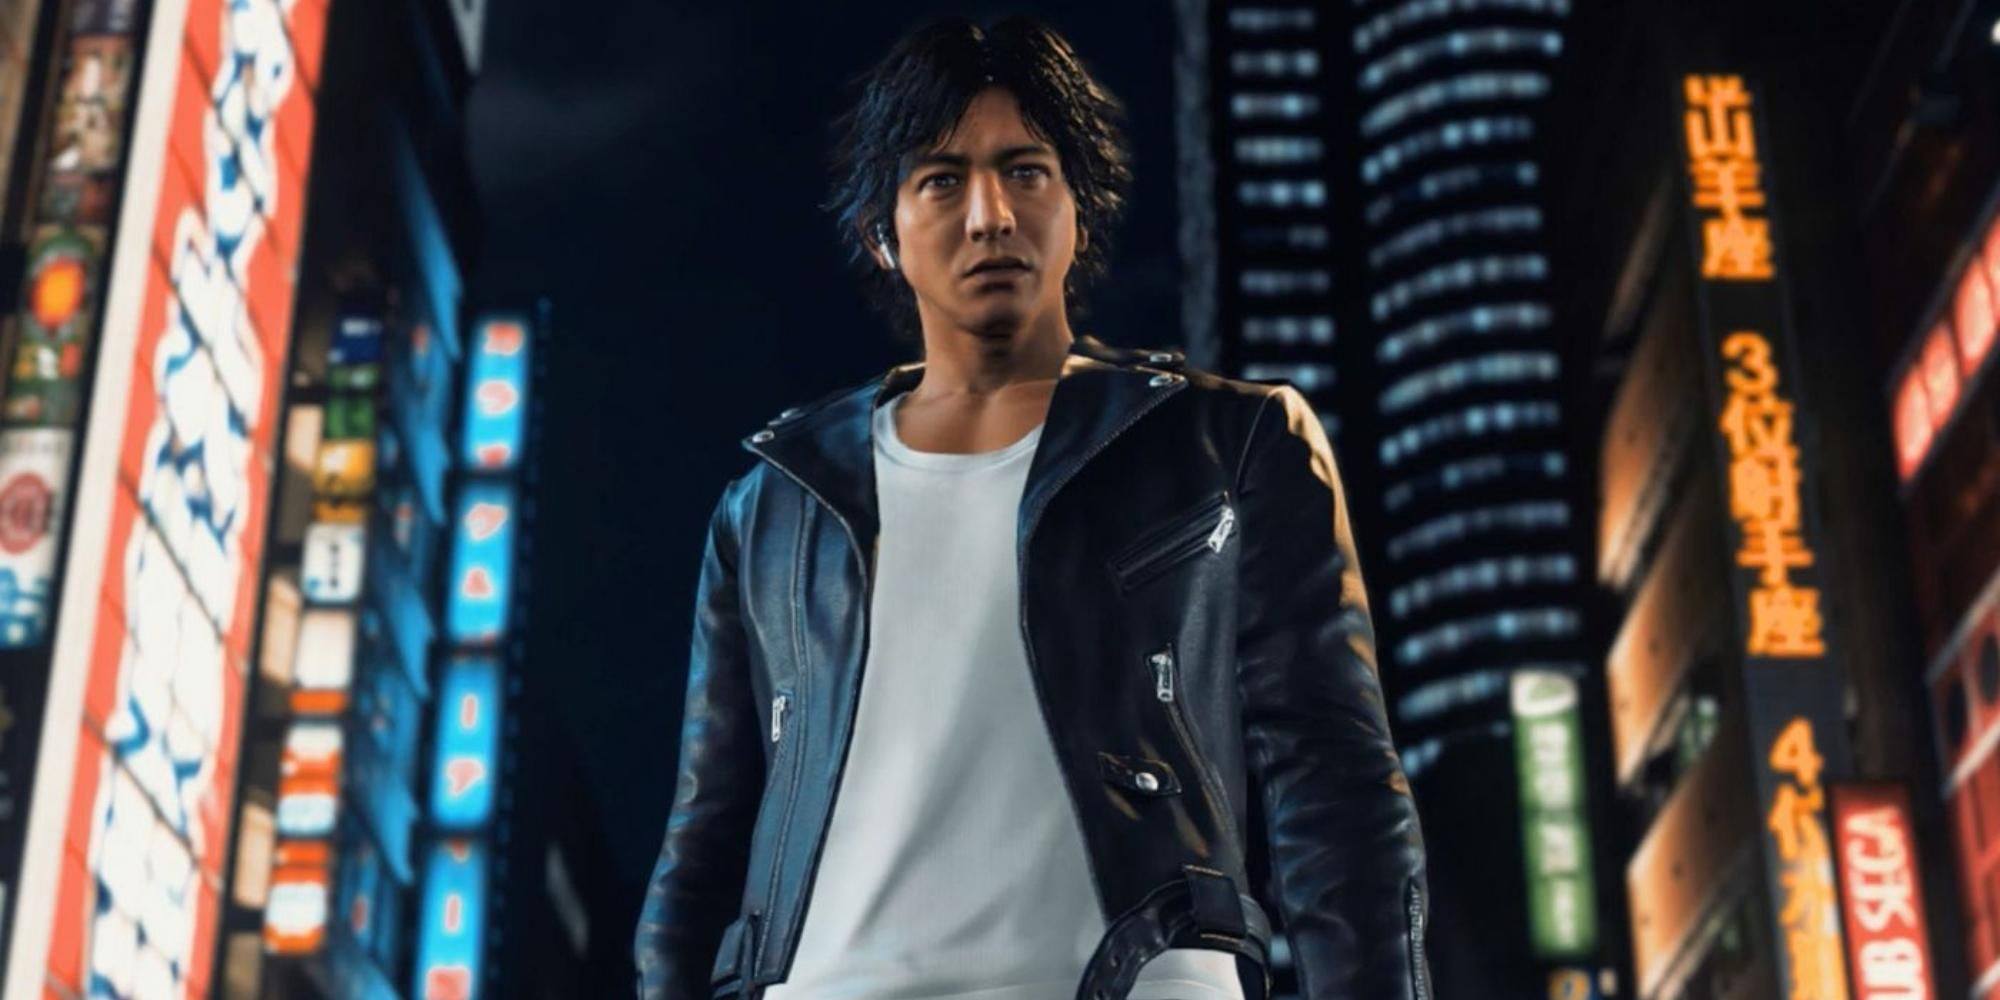 Yagami in Tokyo in Judgment